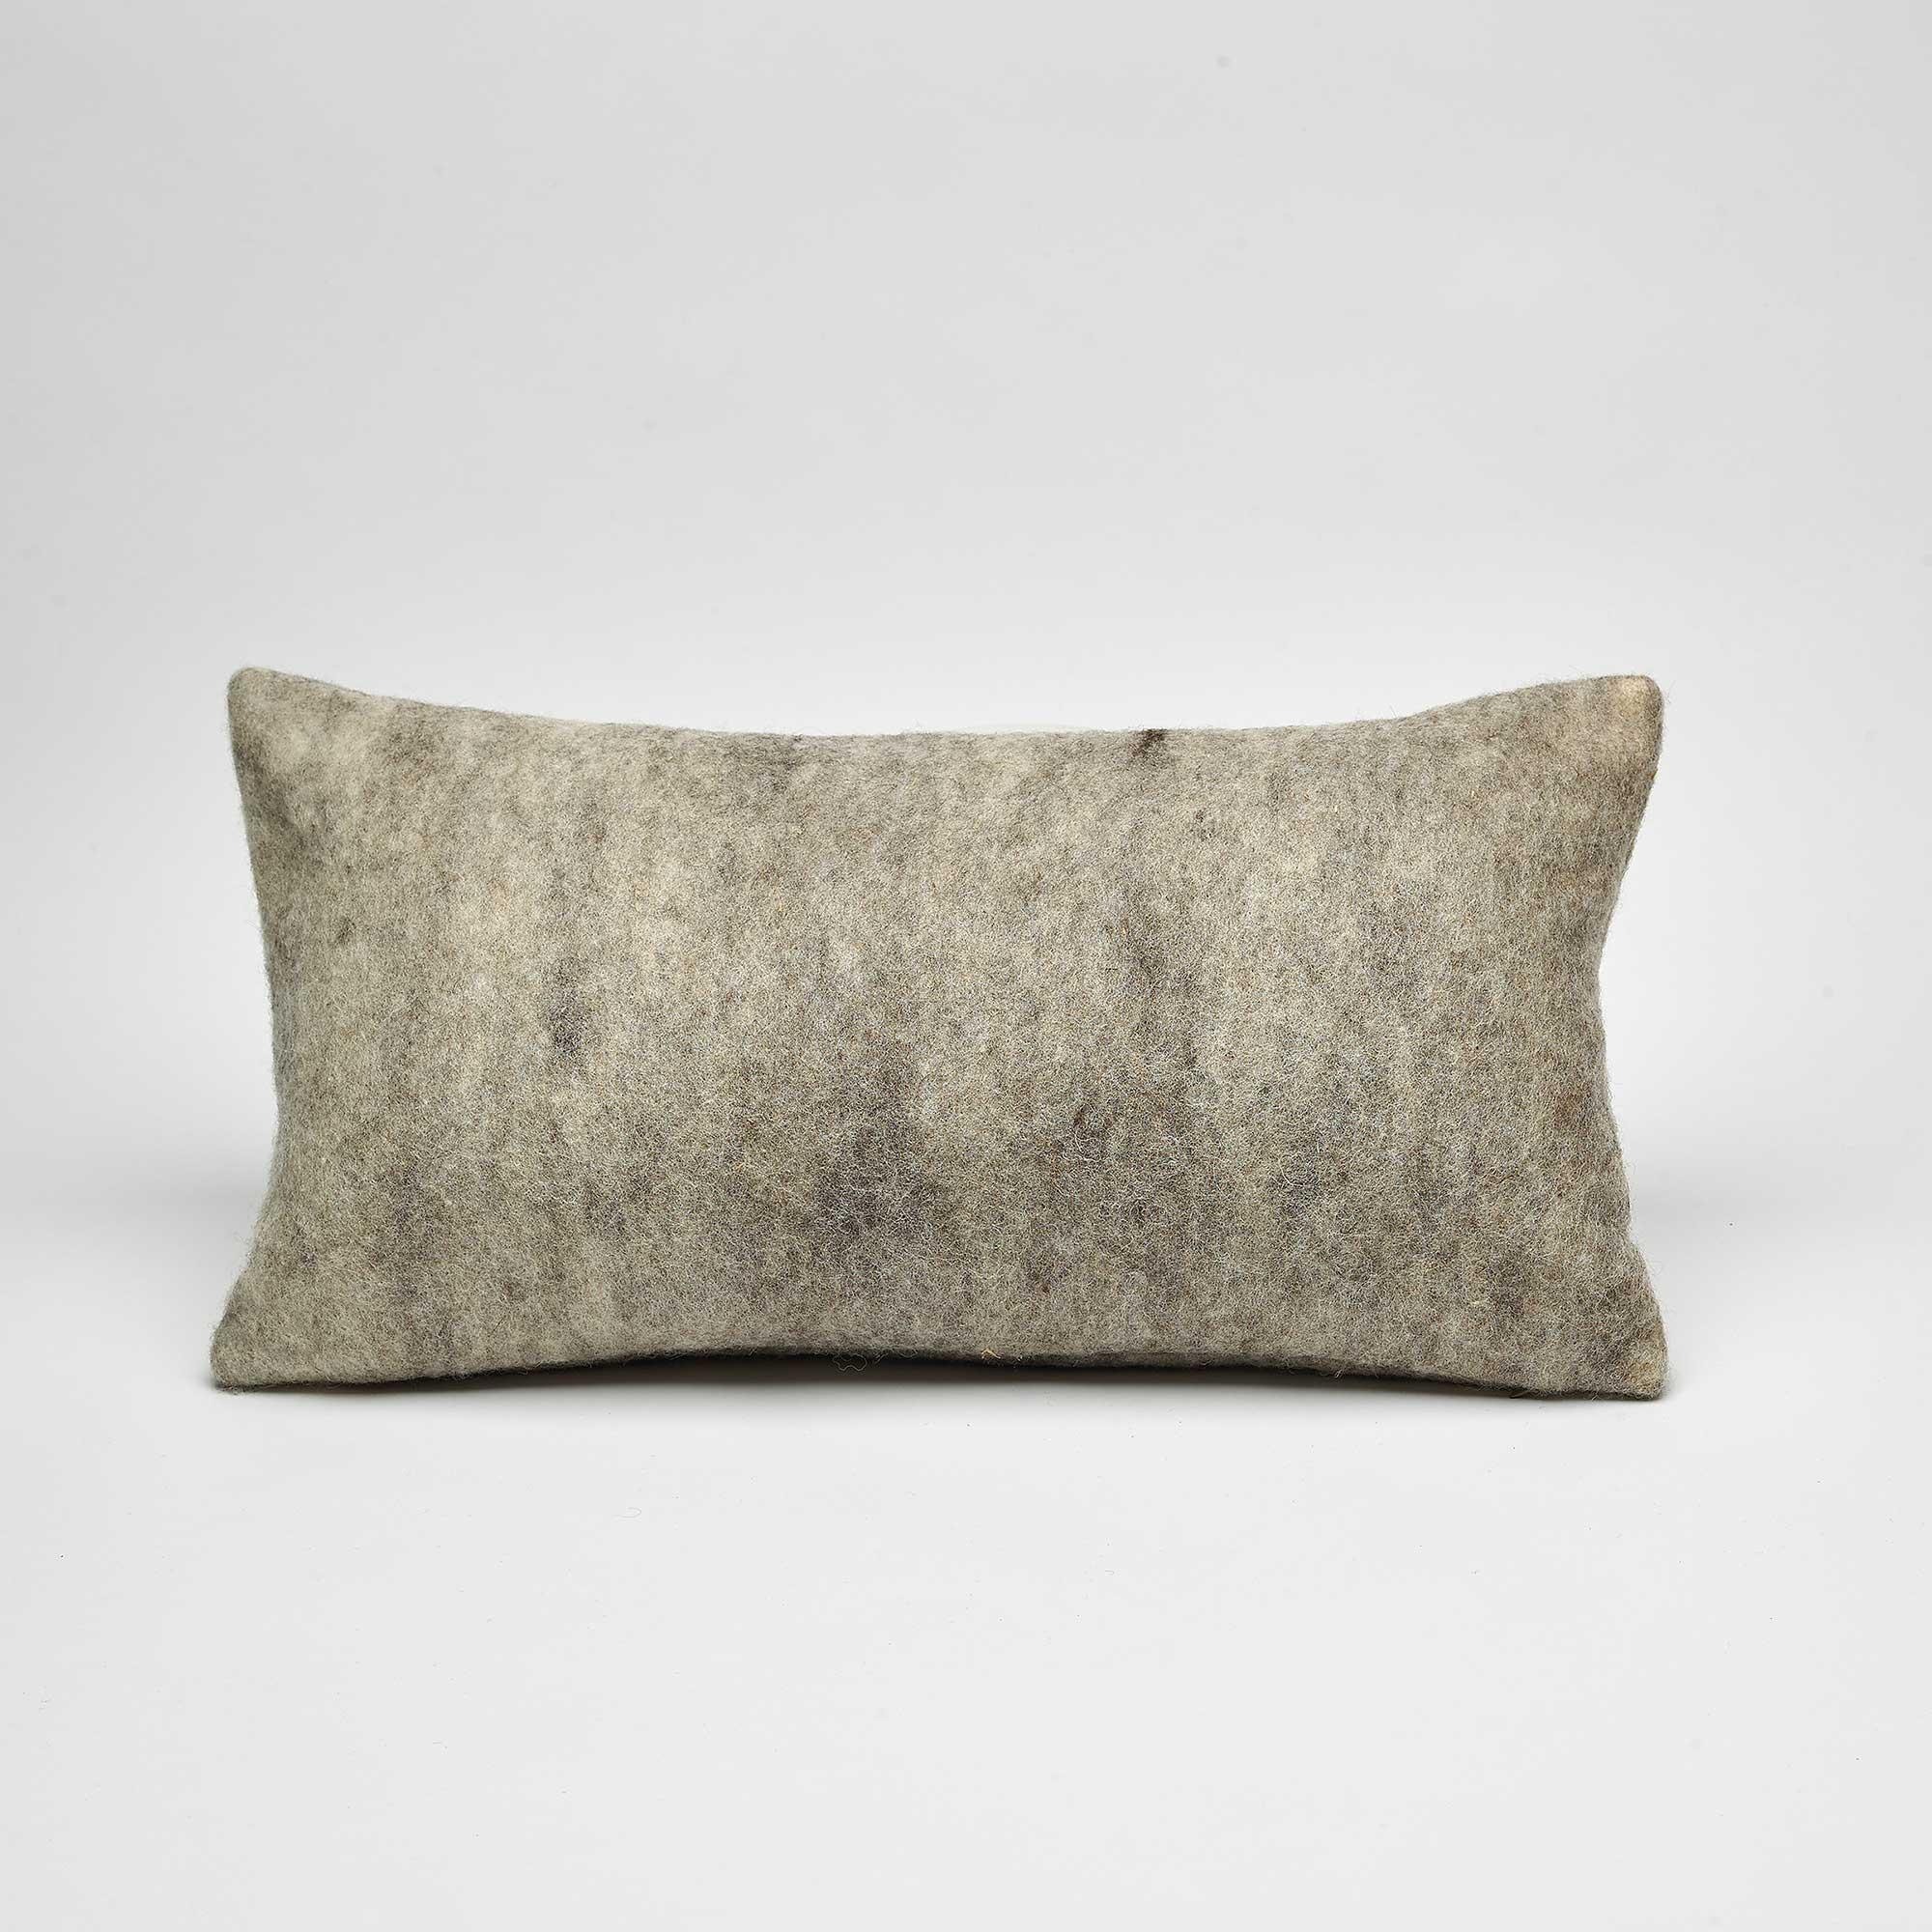 Organic Modern Wool Wensleydale Pillow Grey, Small - Heritage Sheep Collection For Sale